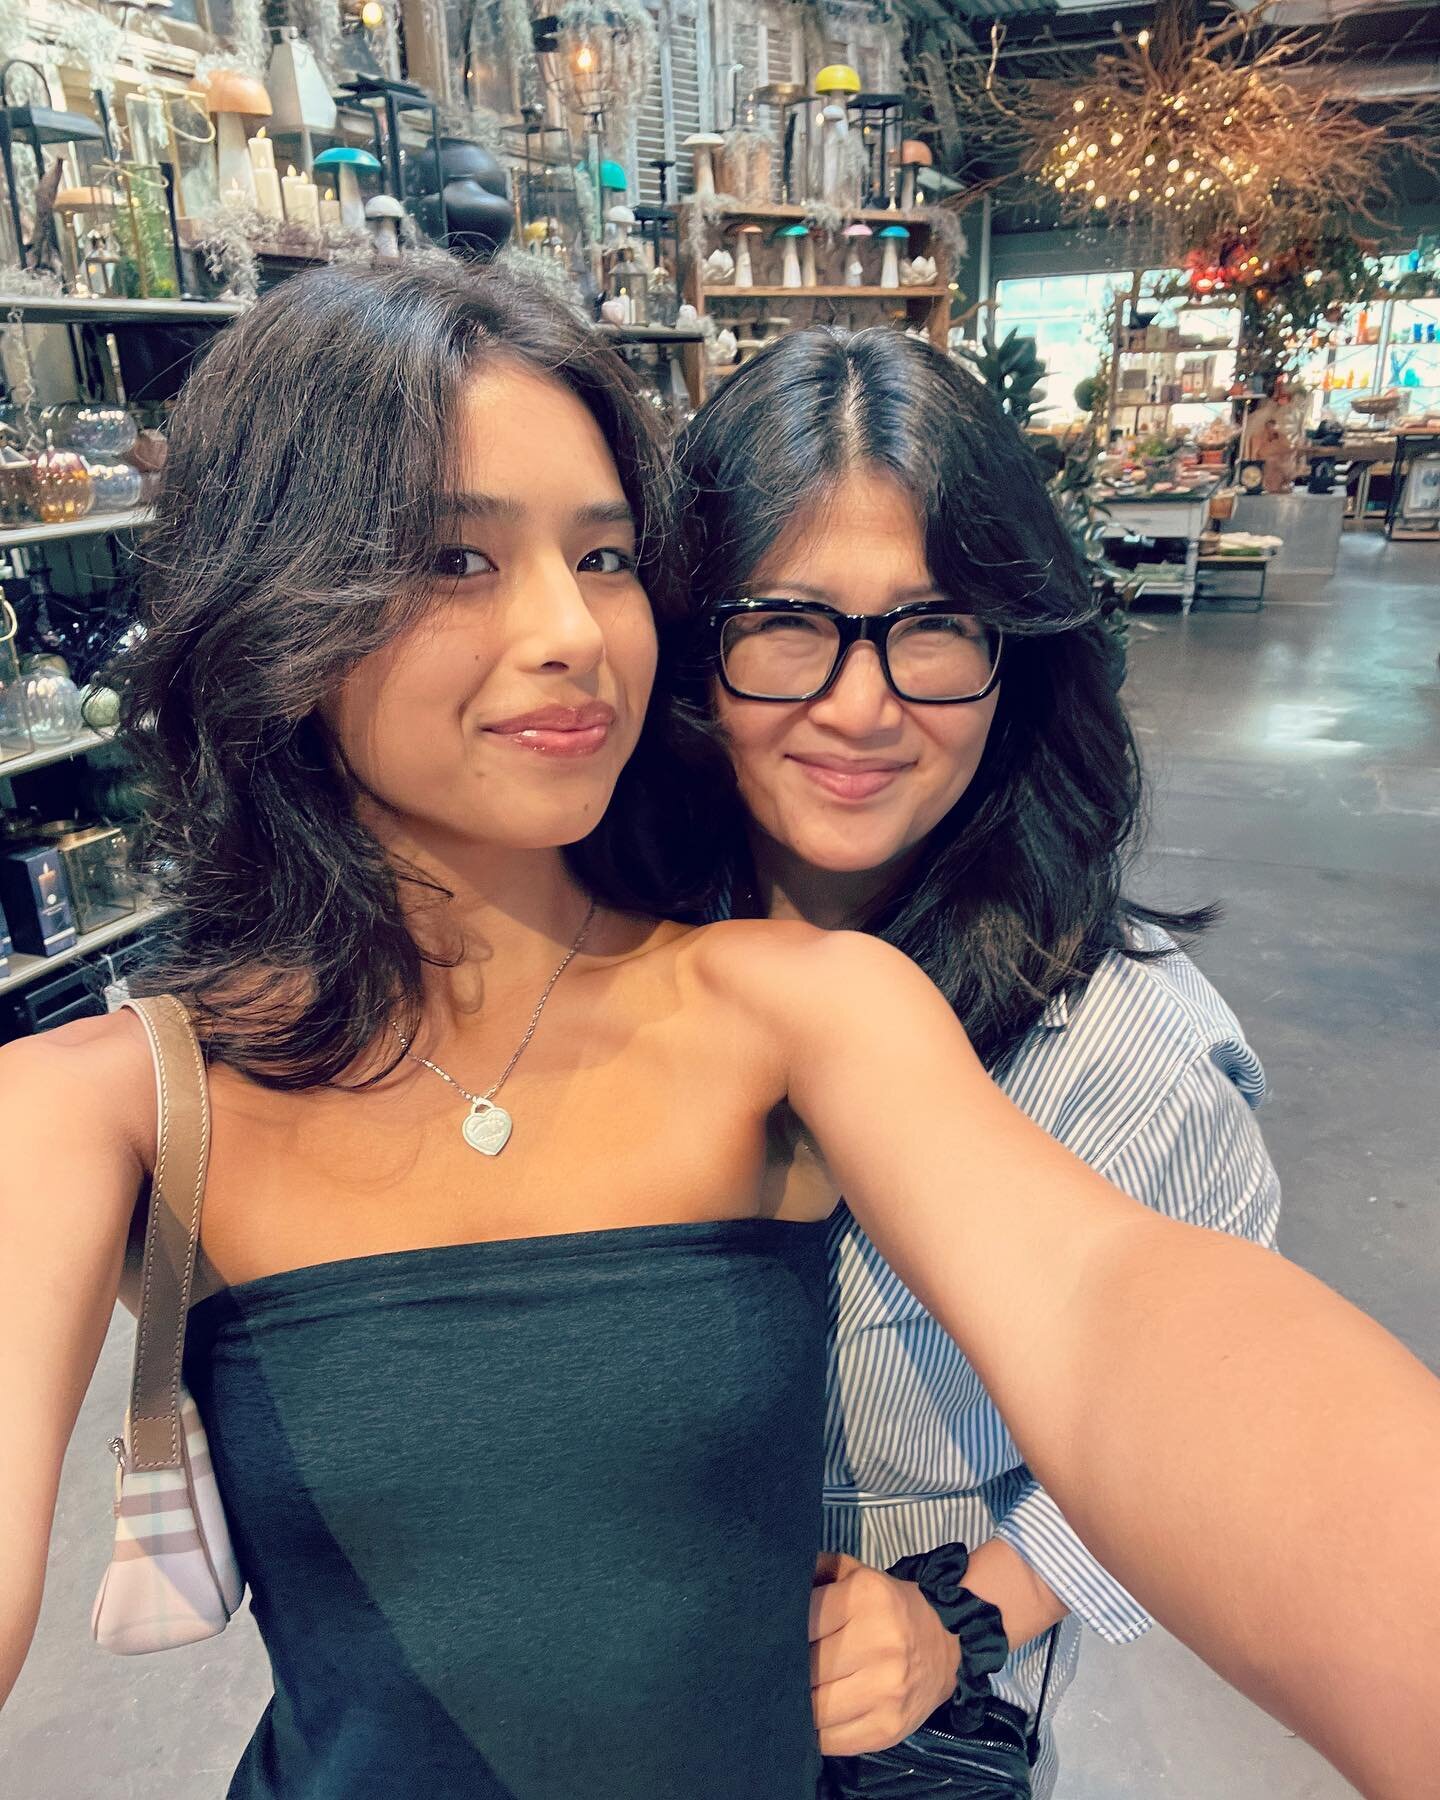 Appreciation for my beautiful inside and out, one of a kind, couldn&rsquo;t have wished for a more amazing daughter!
#appreciation #nationaldaughtersday #nationaldaughterday #funwithdaughter #bfflife